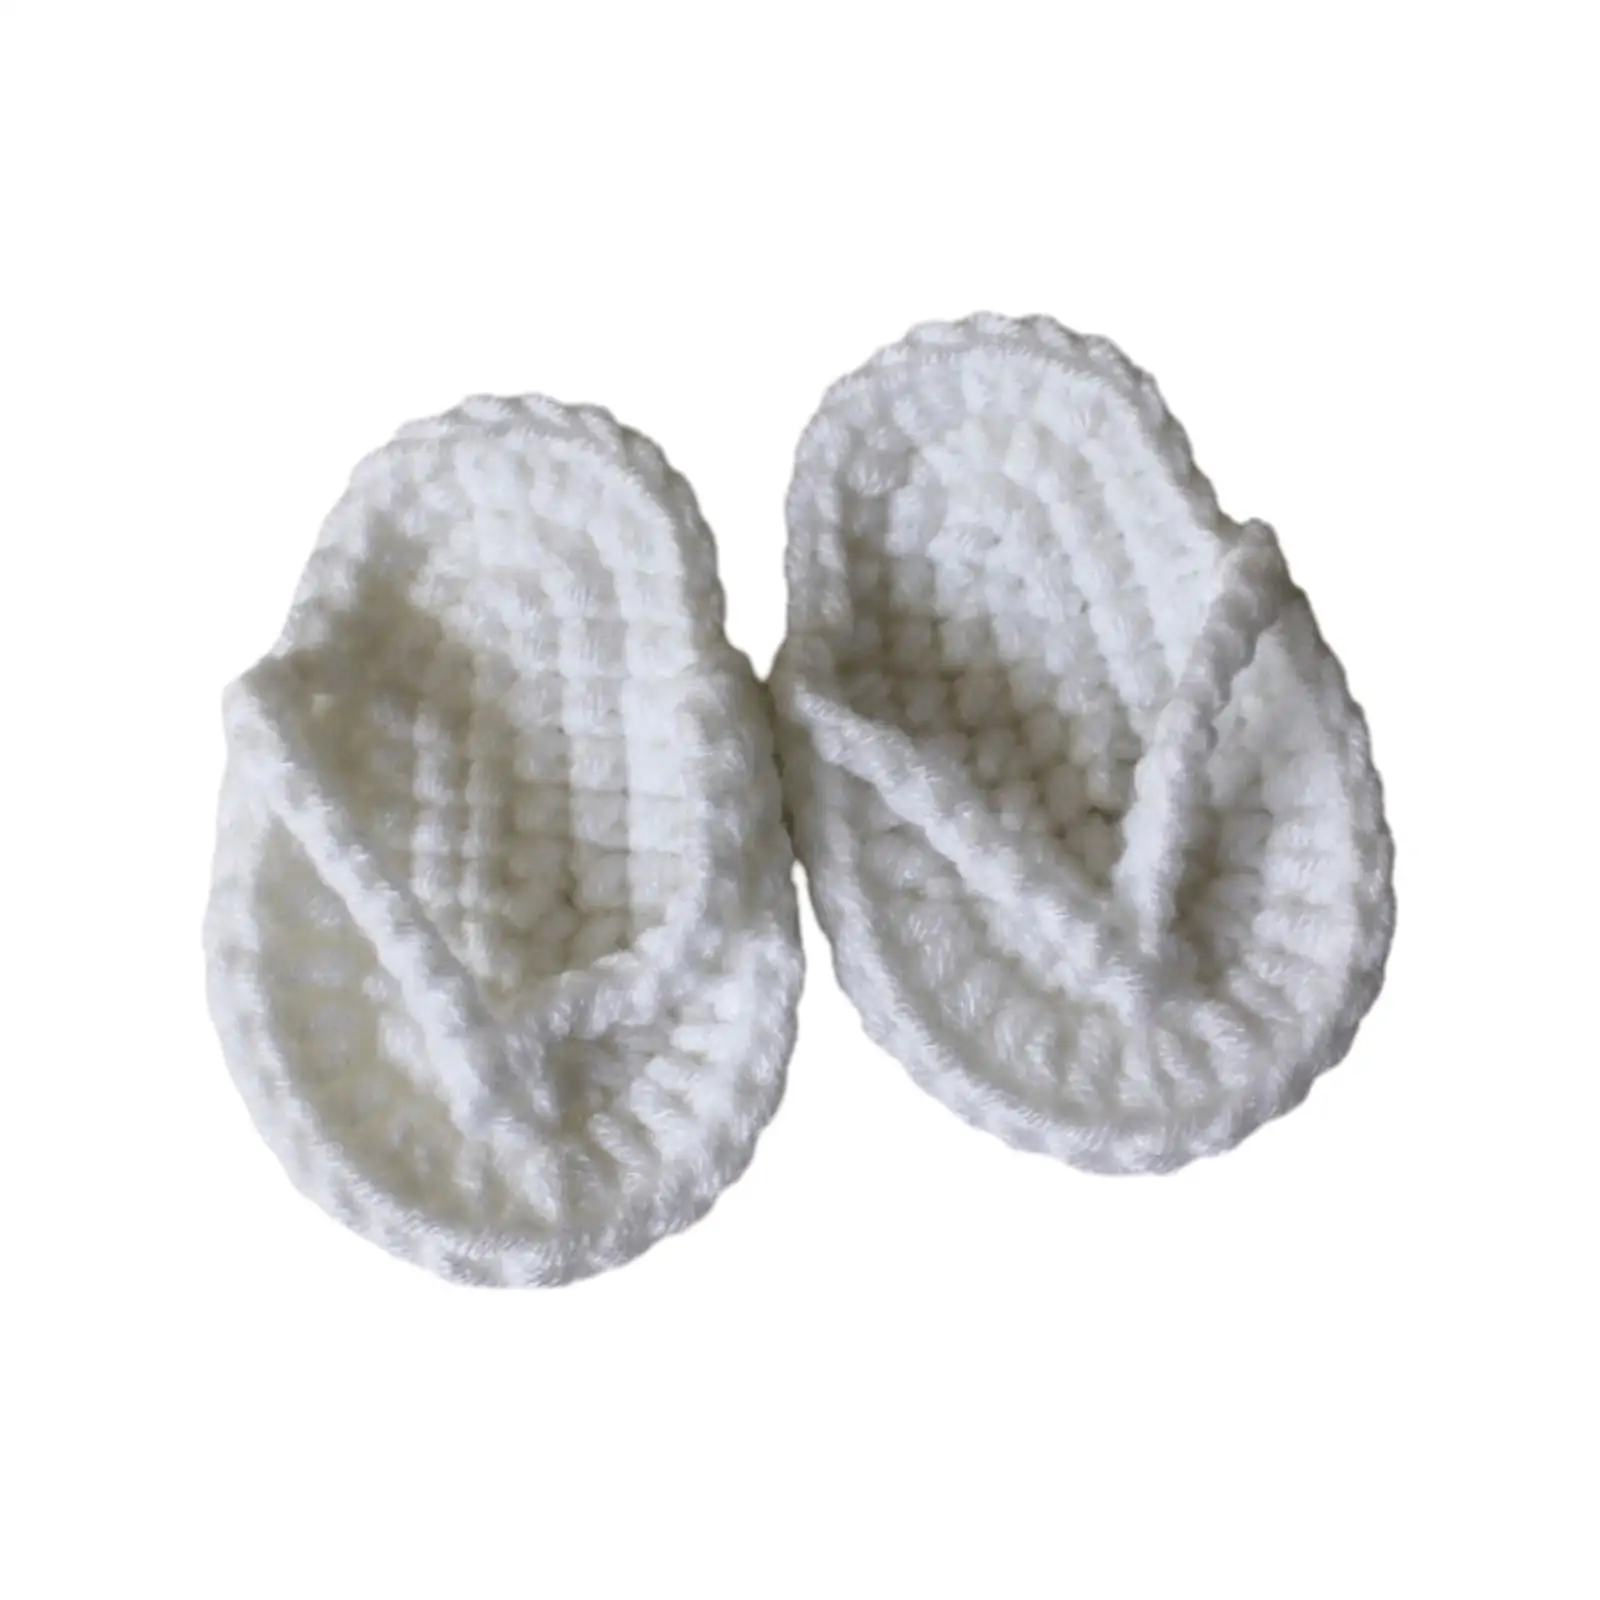 Infant Slippers Newborn Props Cozy Shoes 2.75inch Hand Knitting for Newborn Infant Baby Decors Crochet Solid Baby Slippers 1Pair